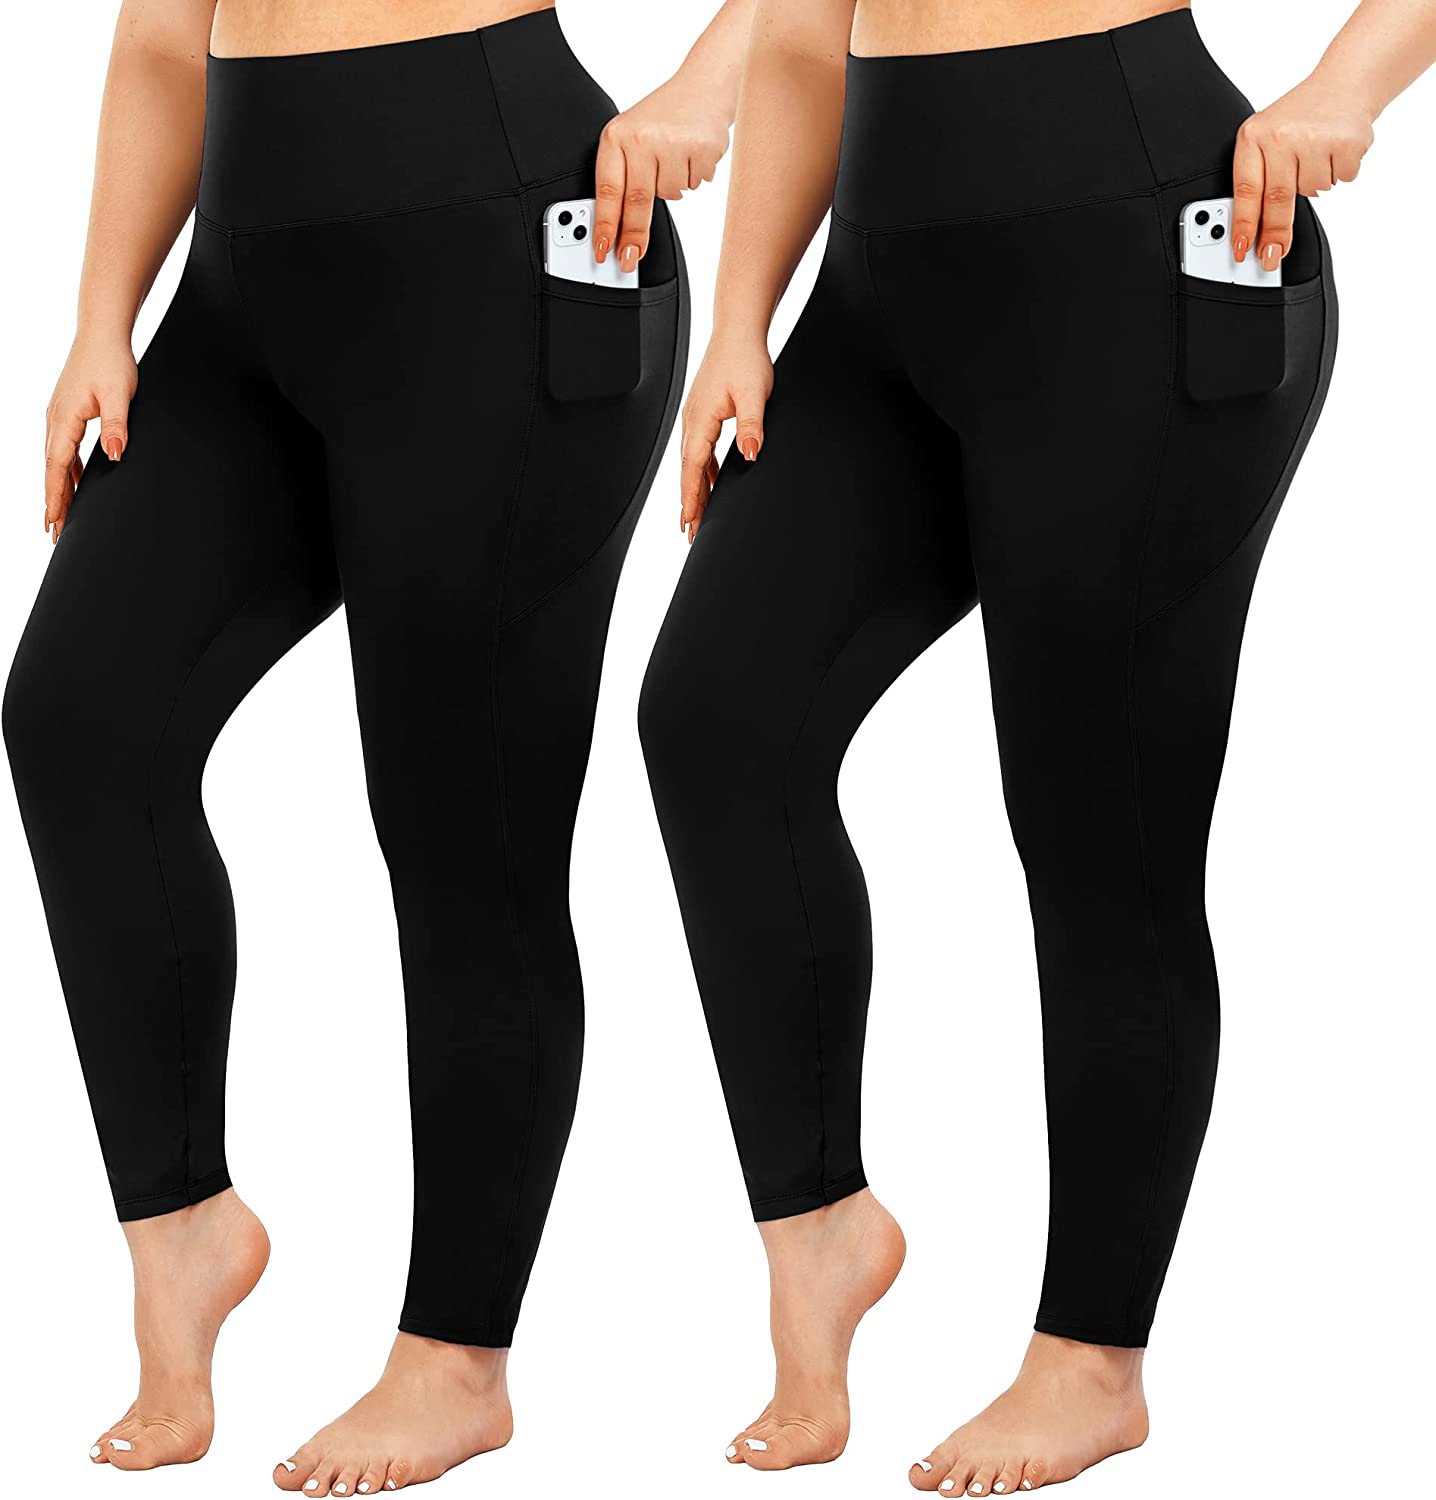 Best Deal for PHISOCKAT 2 Pack High Waist Yoga Pants with Pockets, Tummy